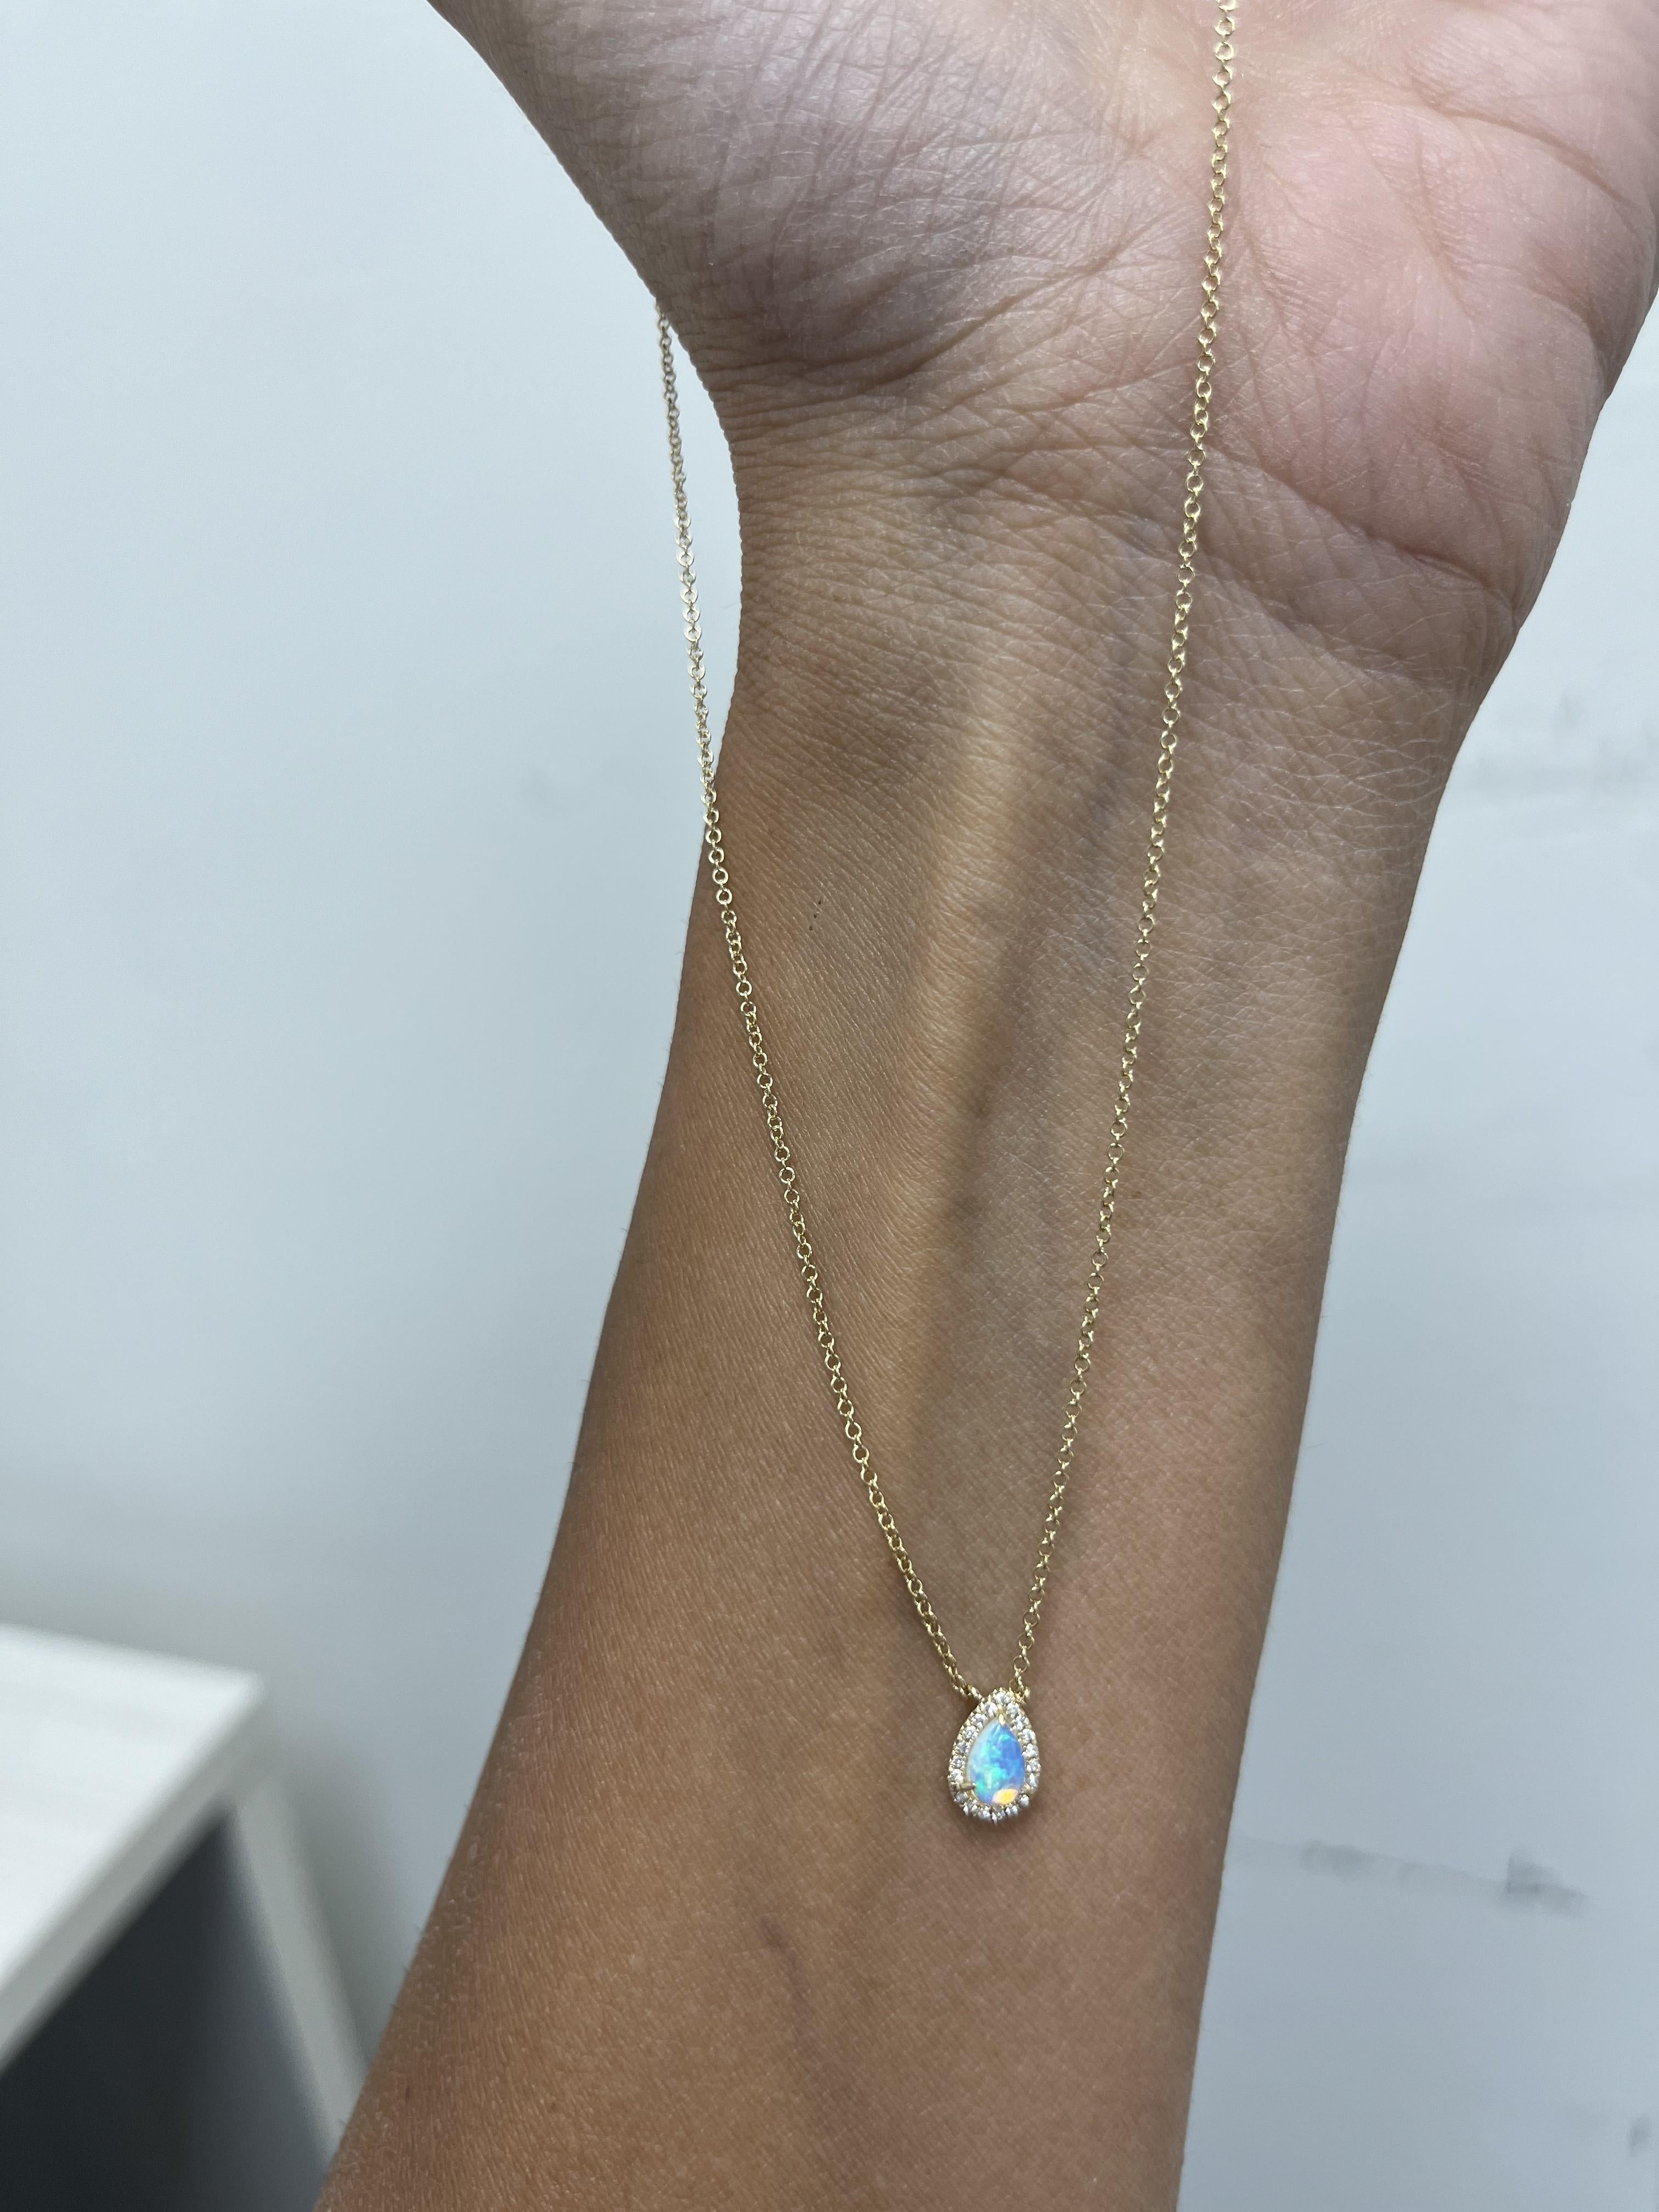 14K GOLD PEAR SHAPE OPAL & DIAMOND NECKLACE 

- Diamond Weight: 0.06 ct.
- Diamond Count: 19
- Opal Weight: 0.30 ct.
- Gold Weight: 2.03 grams (approx.)
- Necklace Length: 16-18 inches

This piece is perfect for everyday wear and makes the perfect